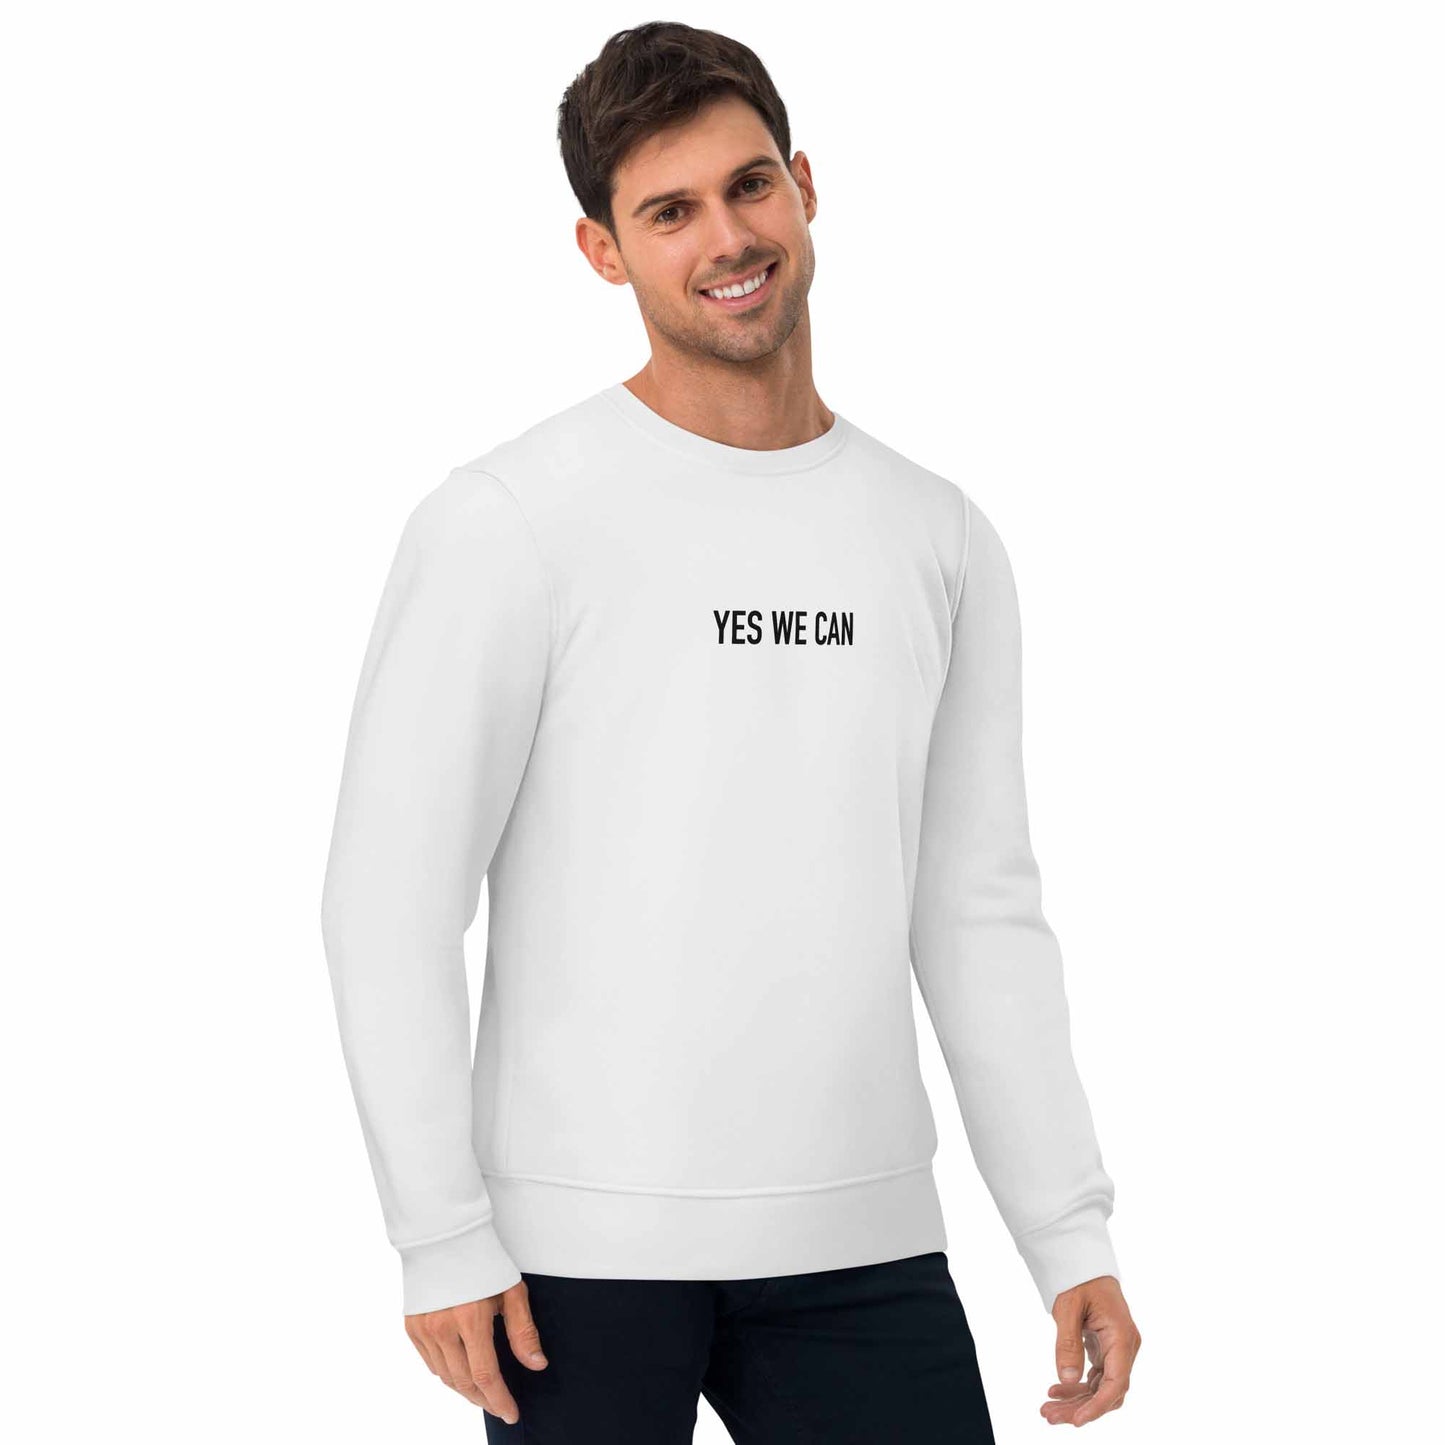 Men white positive sweatshirt with Barack Obama's inspirational quote, "Yes We Can."